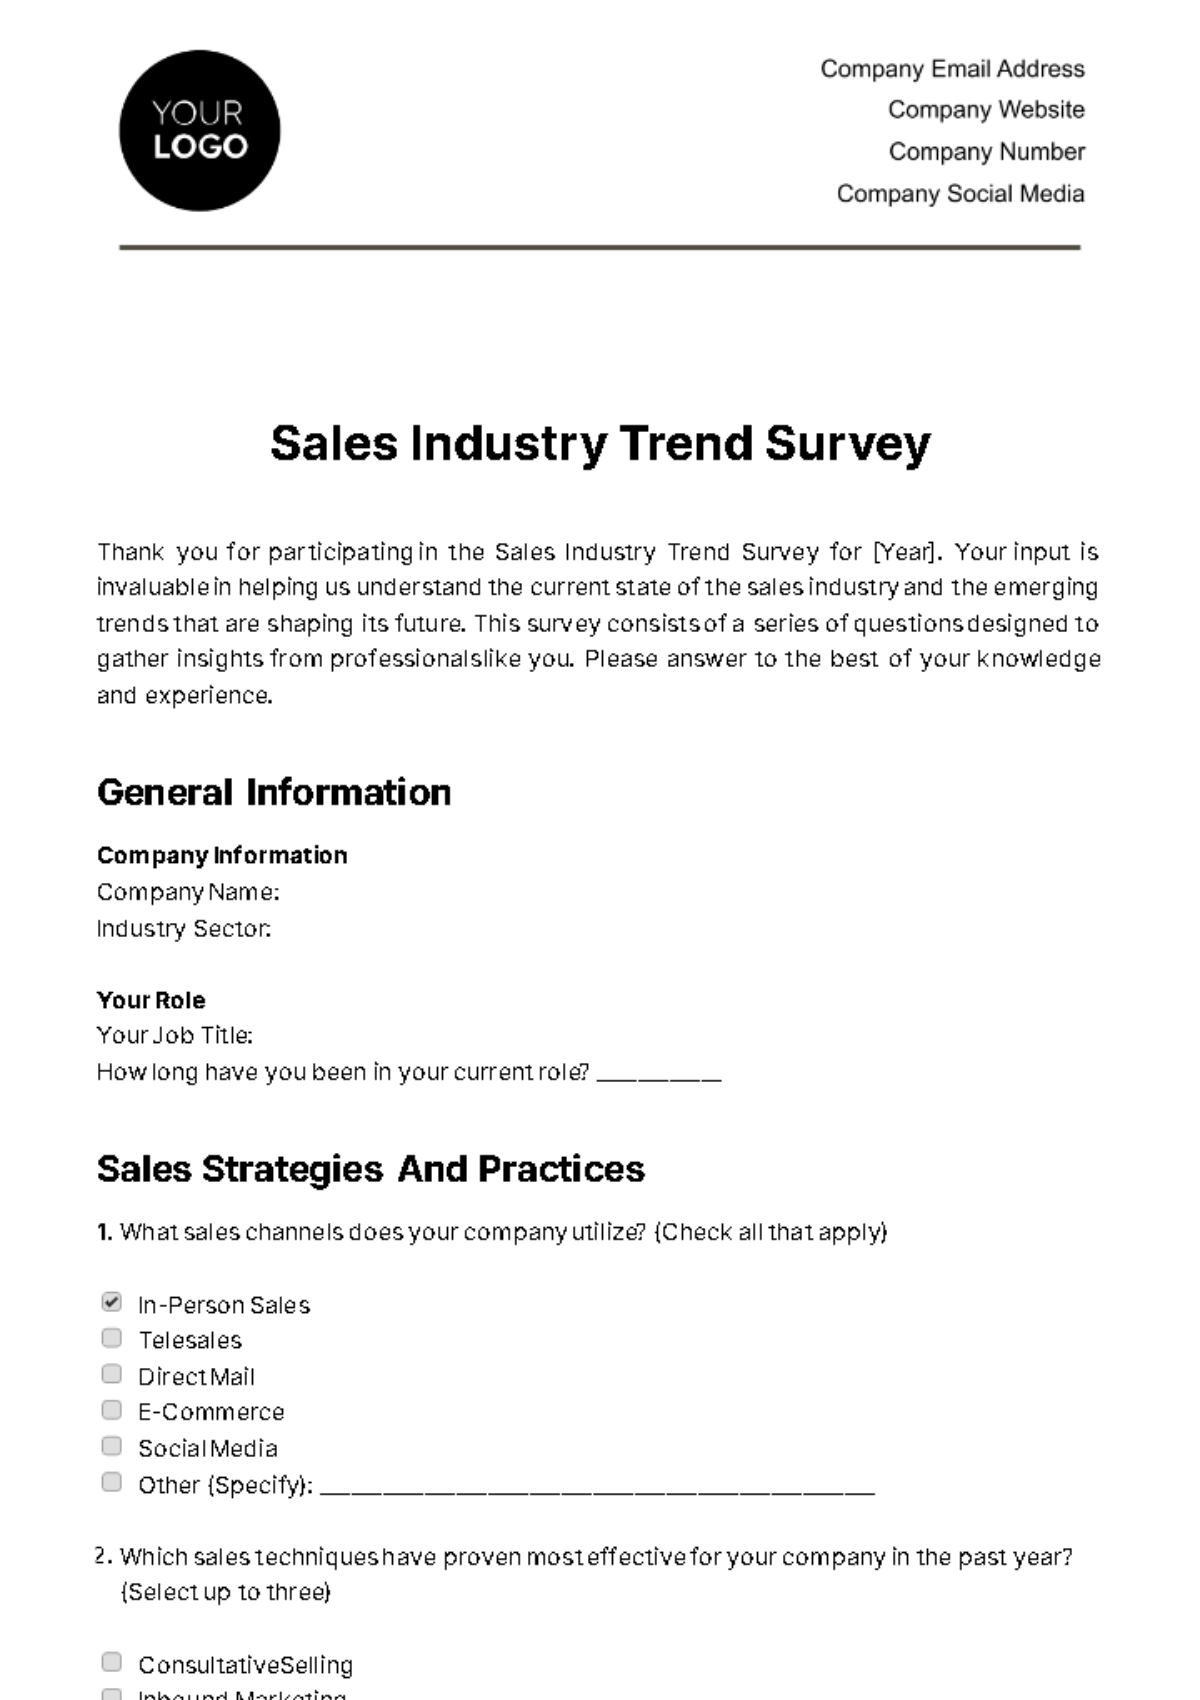 Free Sales Industry Trend Survey Template